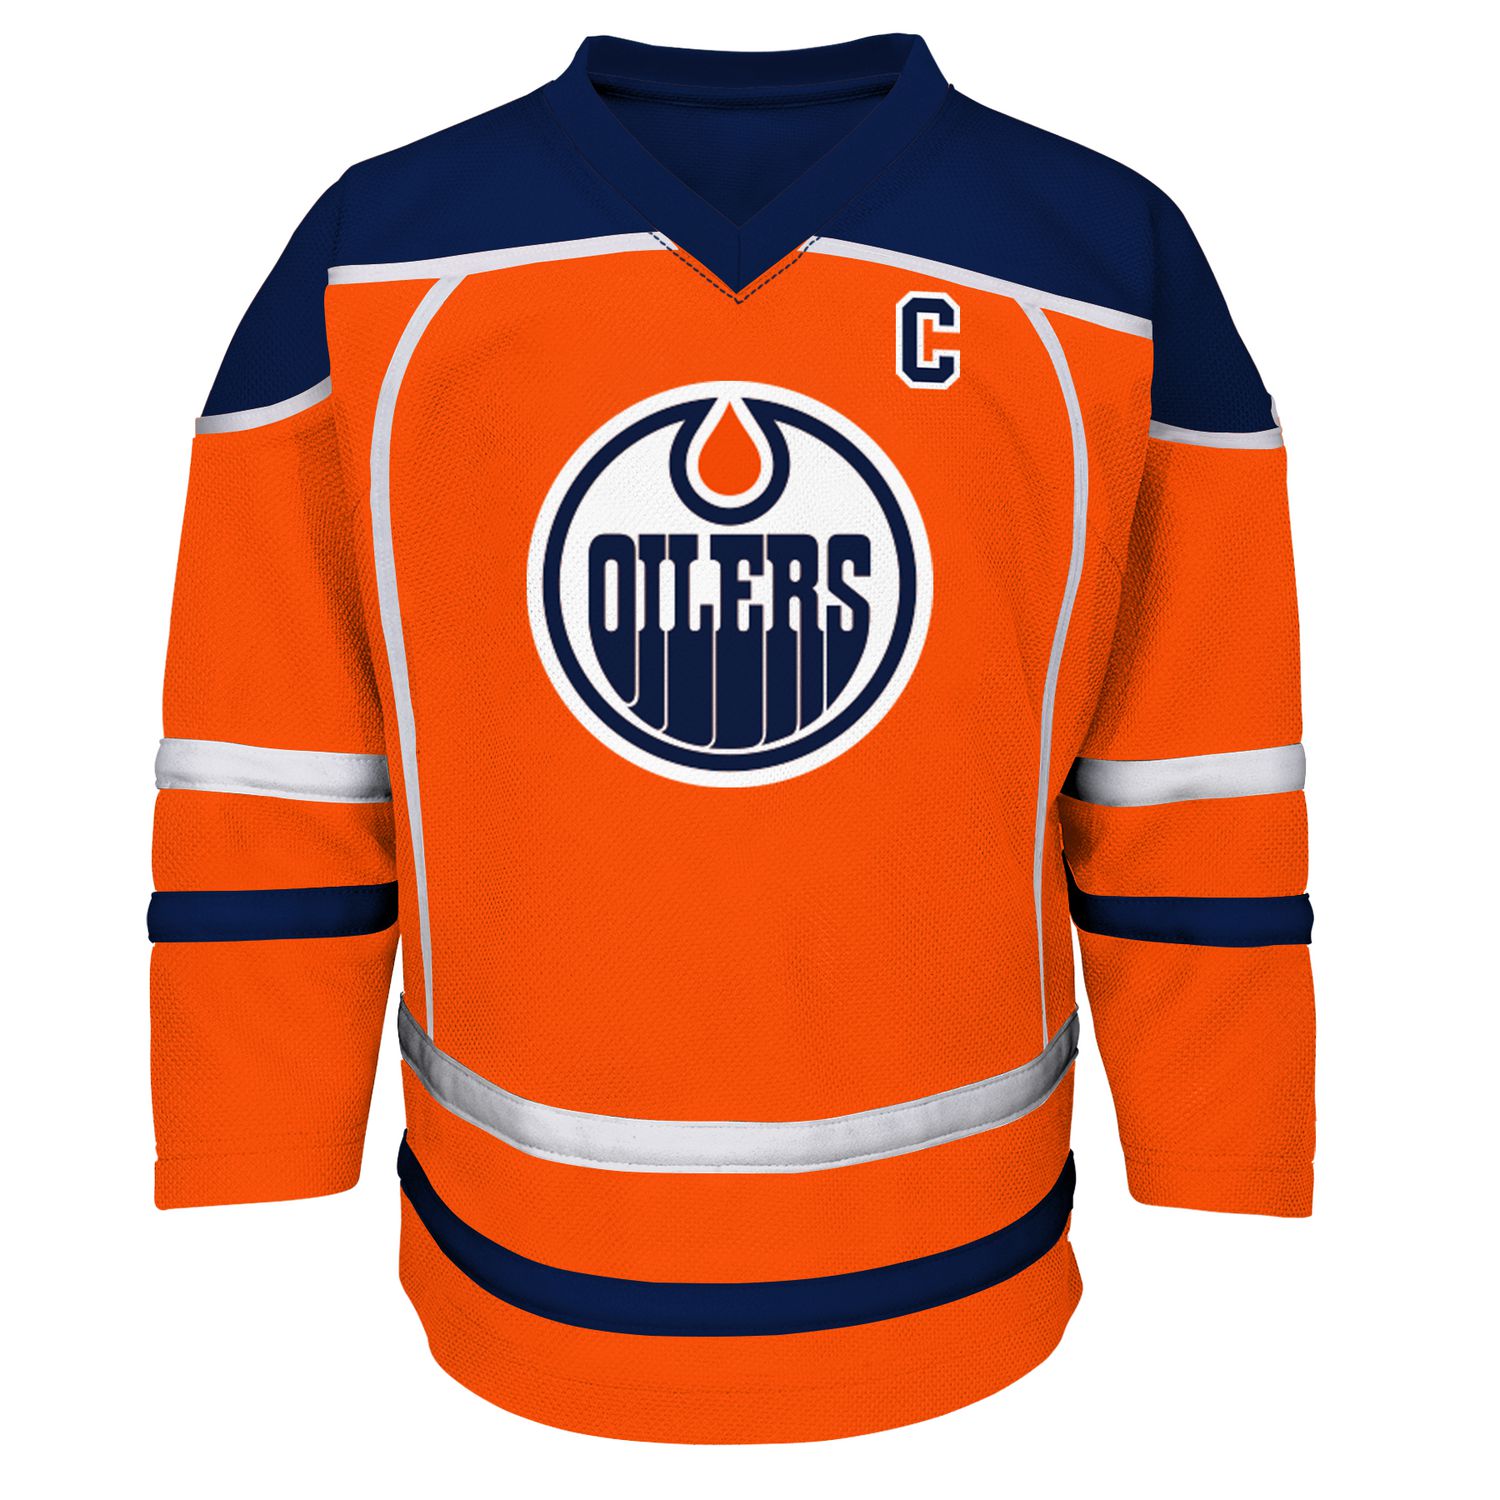 youth oilers jersey